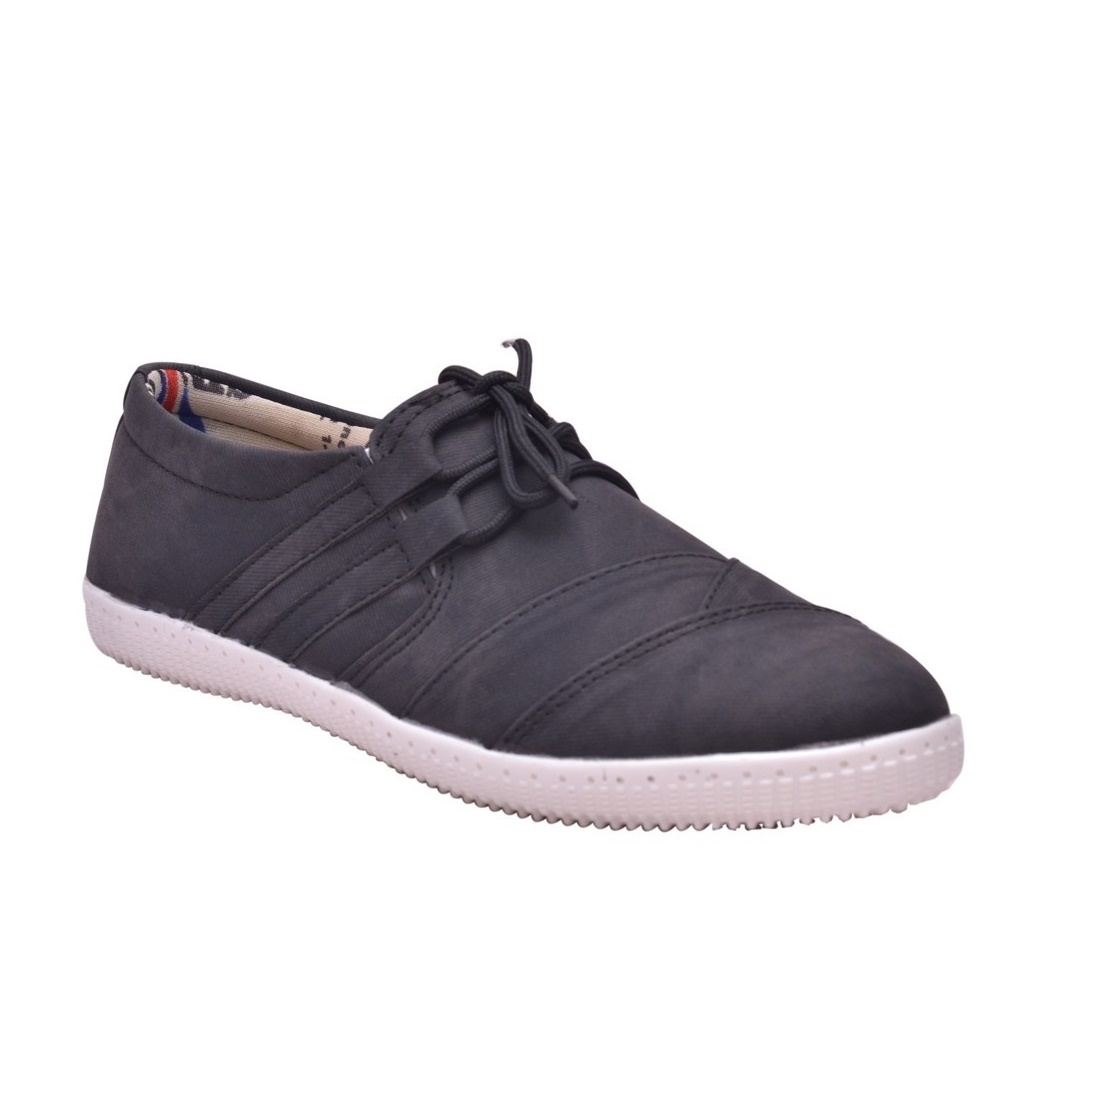 LACE-UP CASUAL SHOES FOR MEN'S